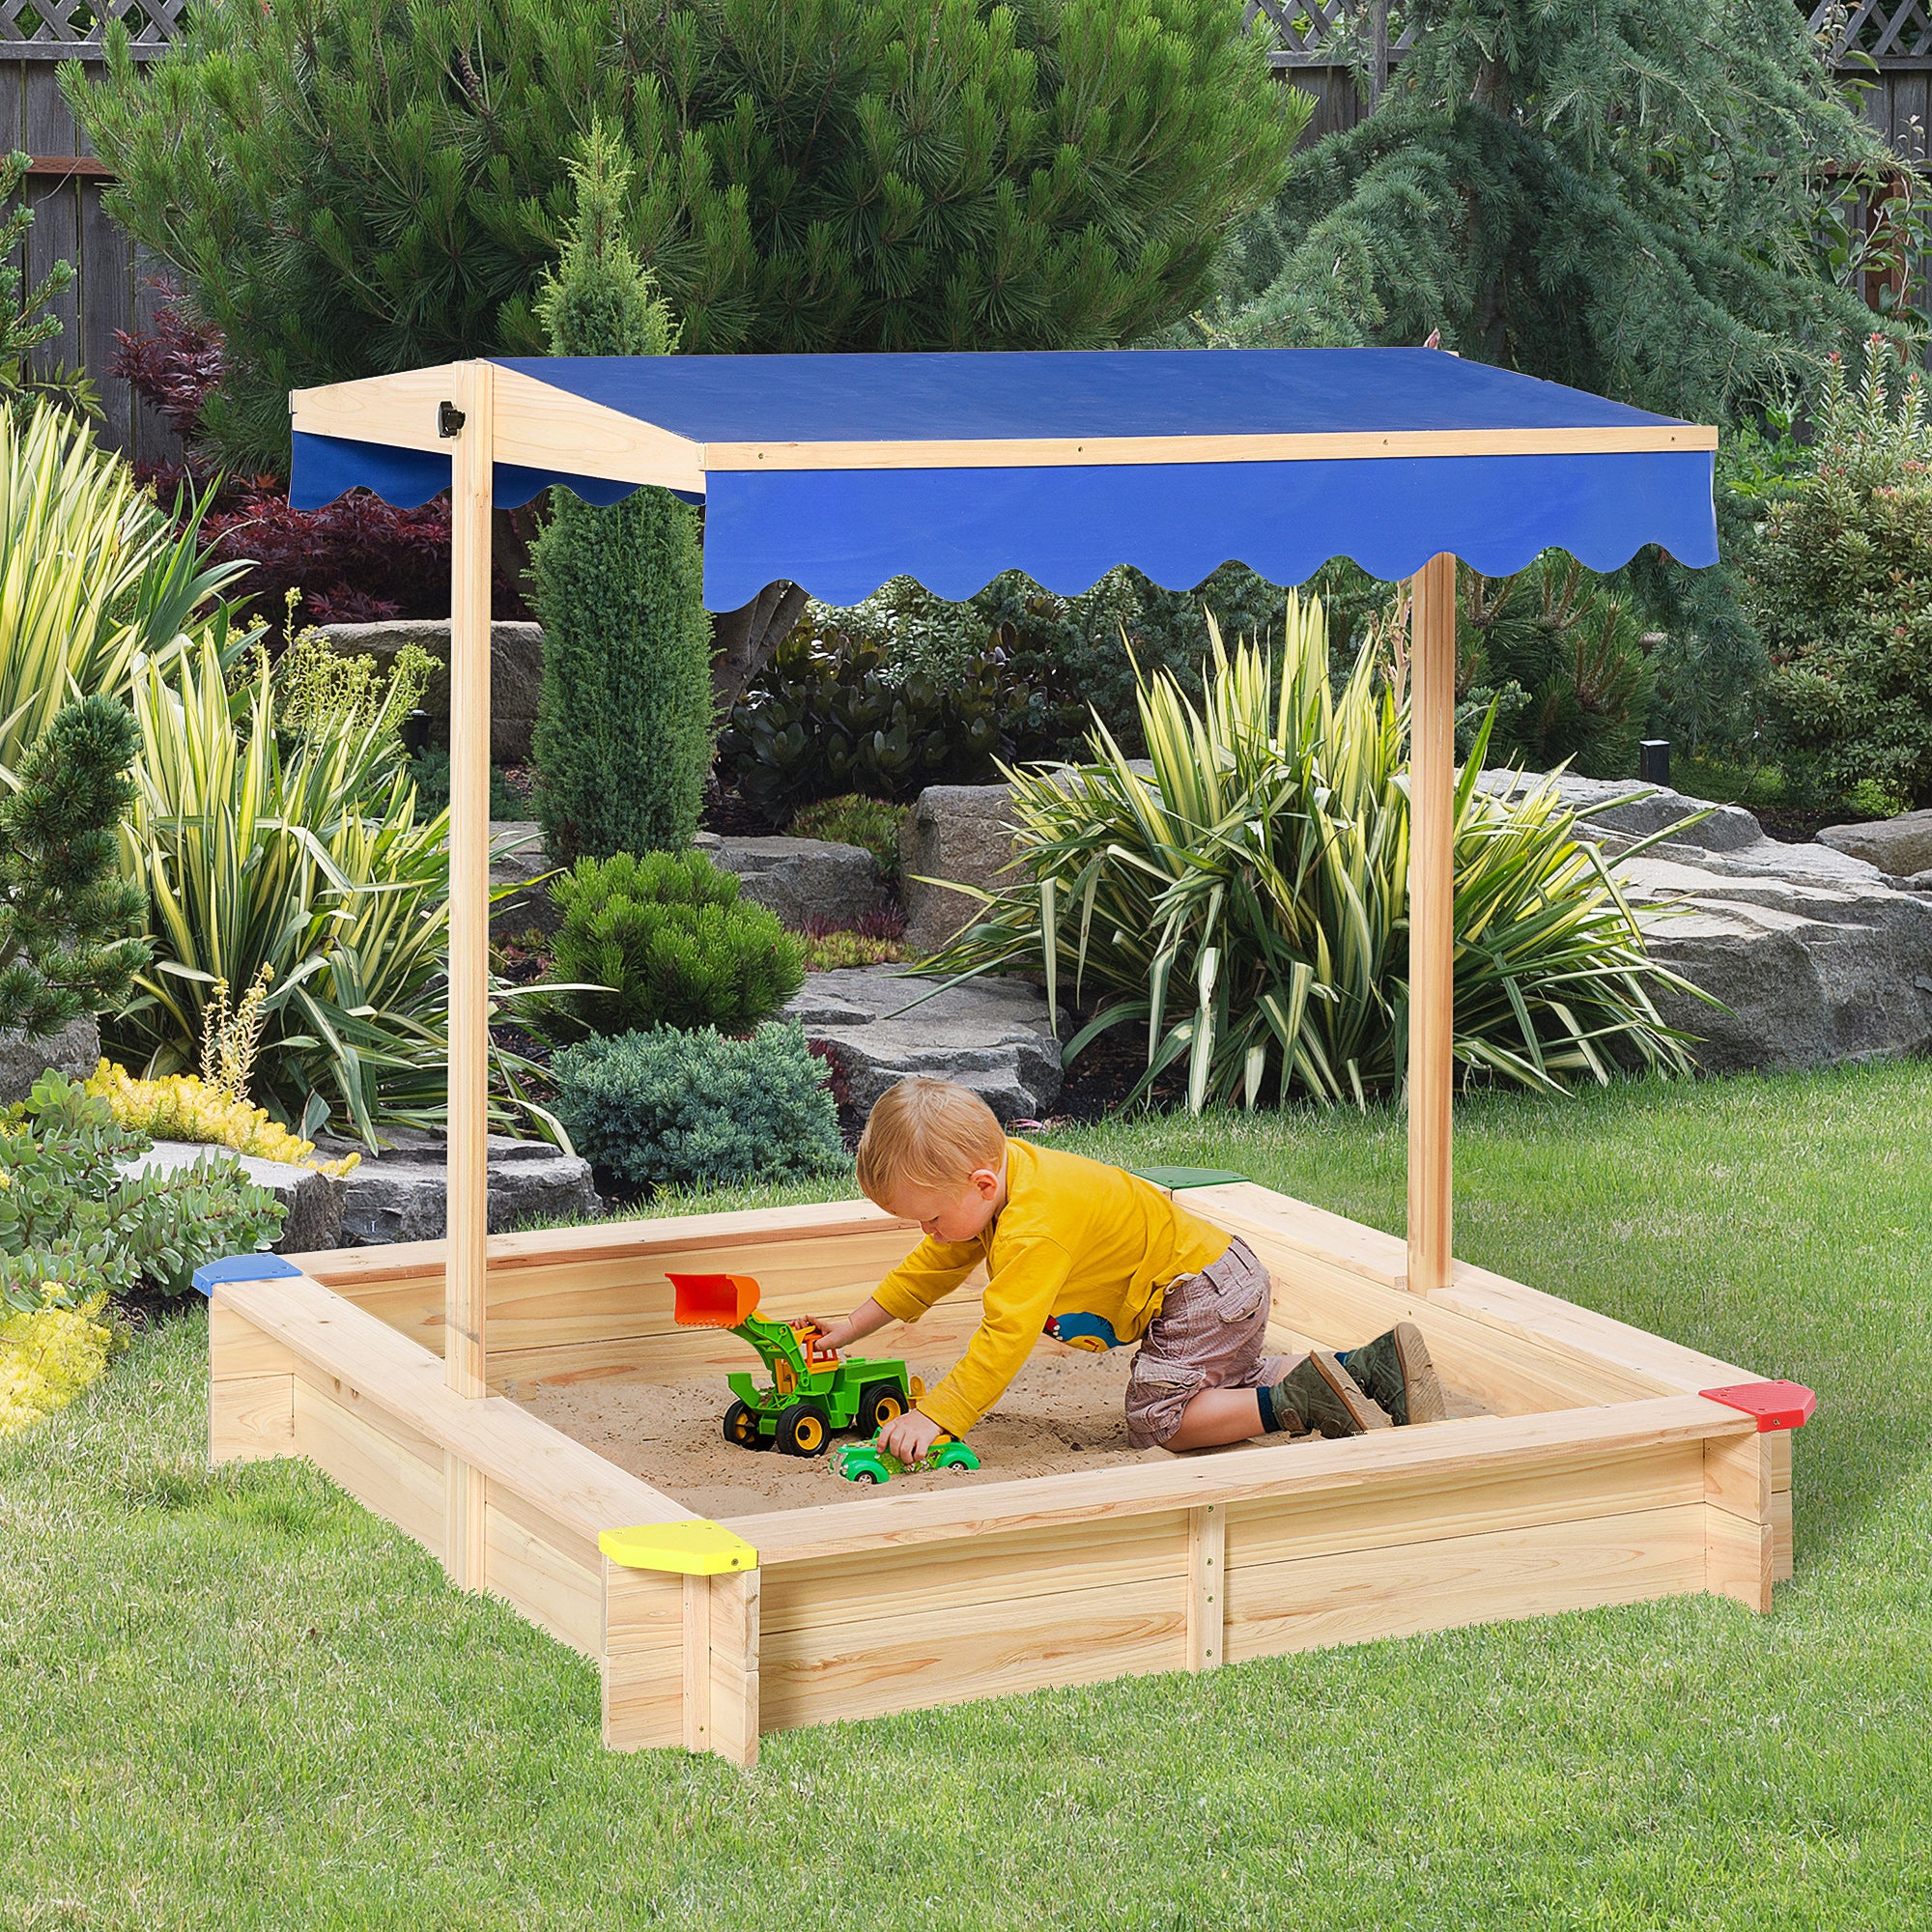 Outsunny Kids Wooden Sandpit Children Cabana Square Sandbox Outdoor Backyard Playset Play Station Adjustable Canopy Bench Seat 120x120x120cm